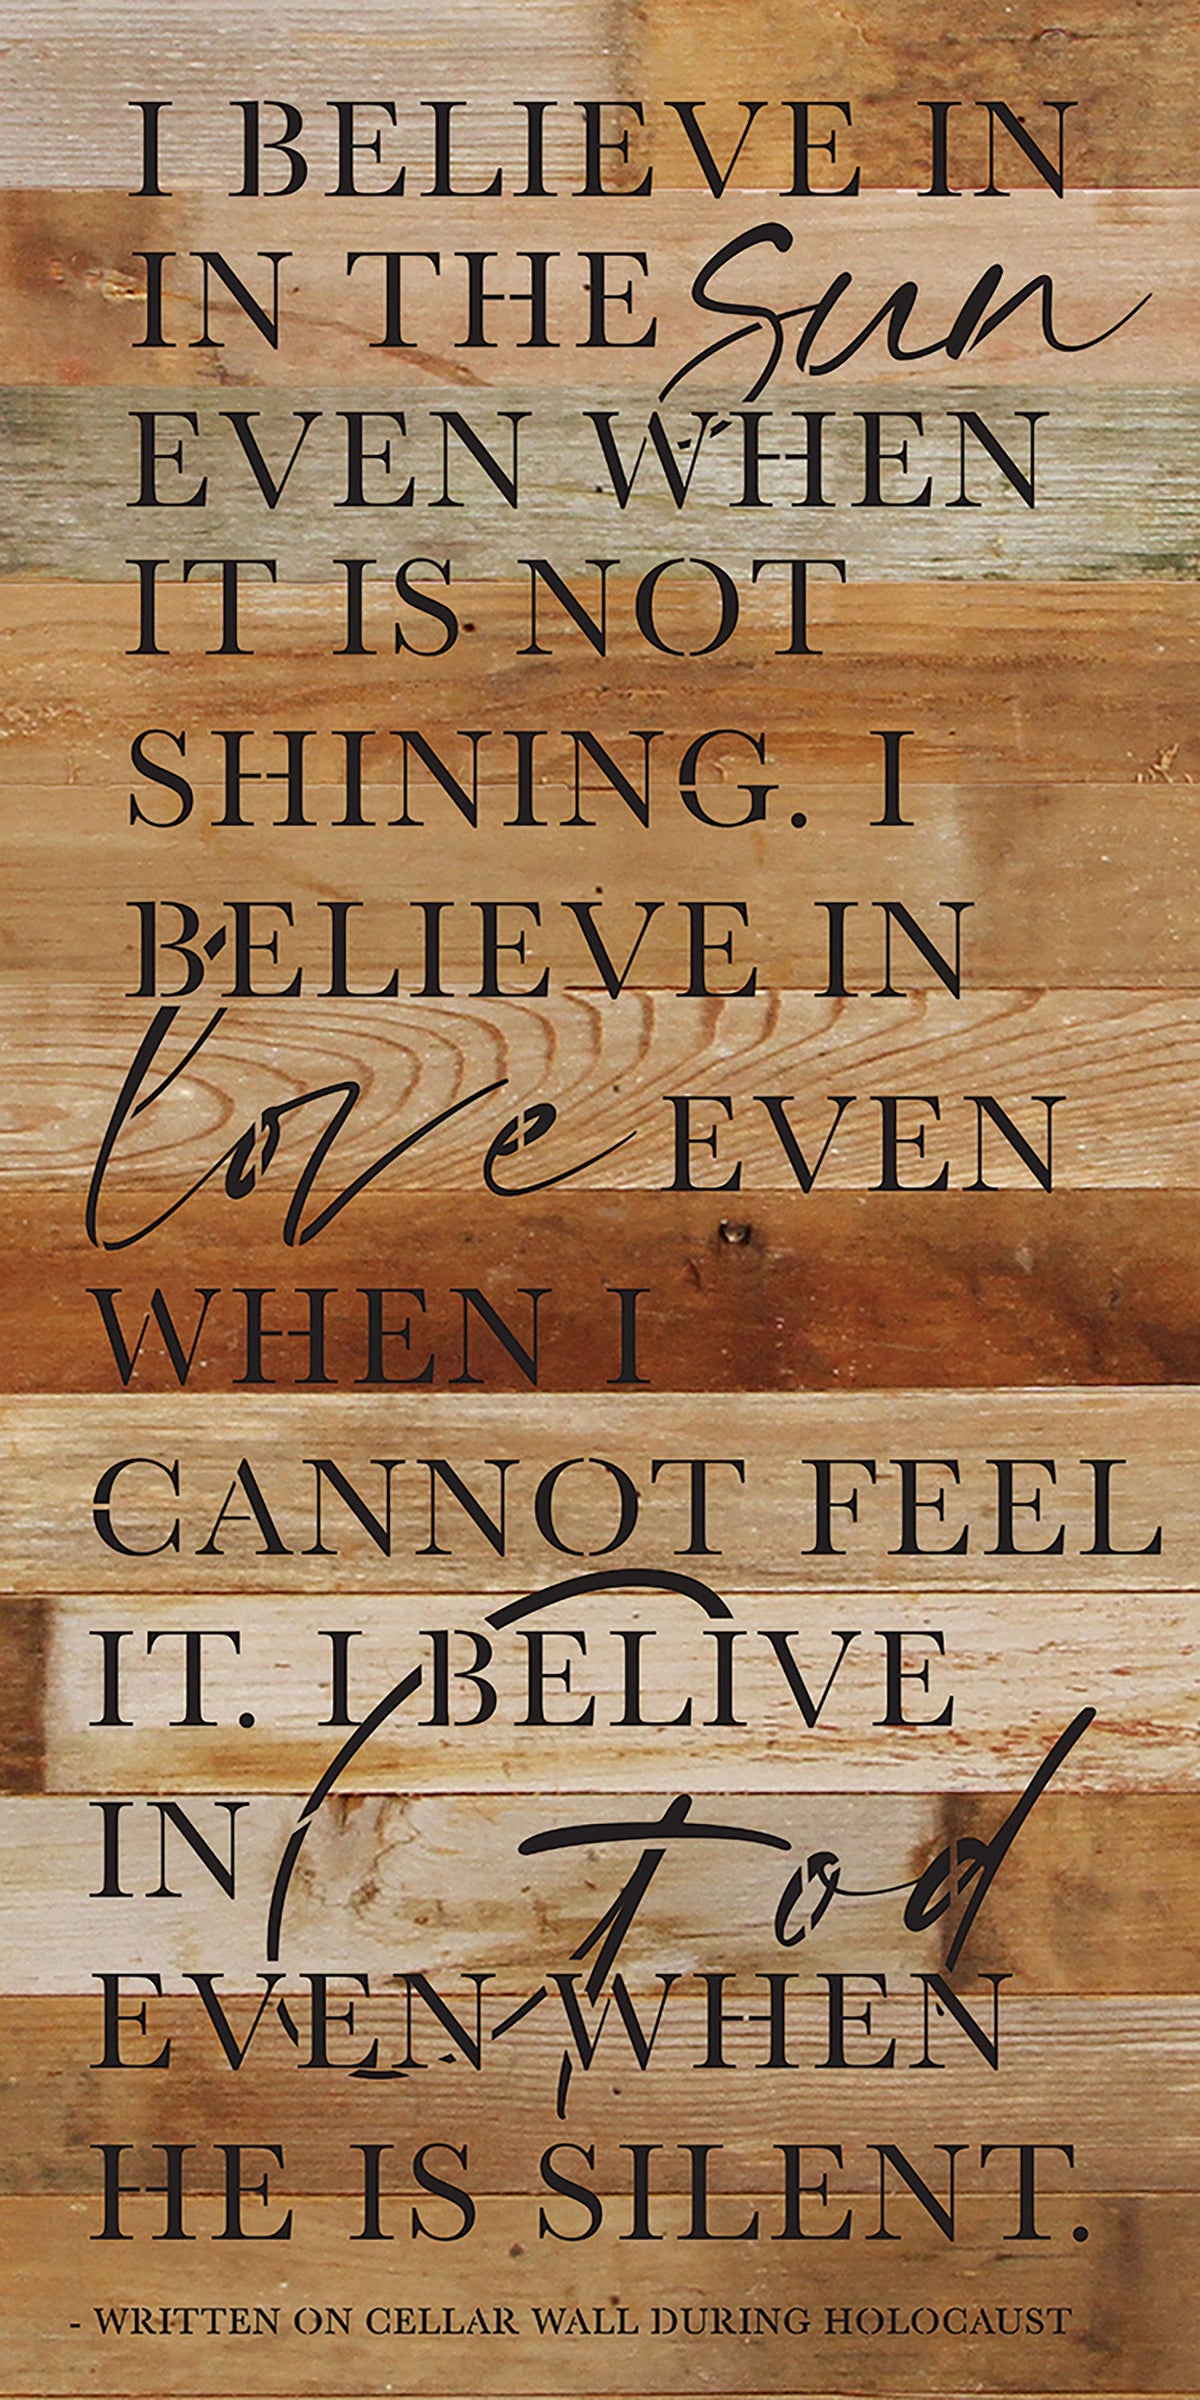 I believe in the sun even when it is not shining. I believe in love even when I cannot see it. I believe in God when in he is silent / 12x24 Reclaimed Wood Wall Decor Sign